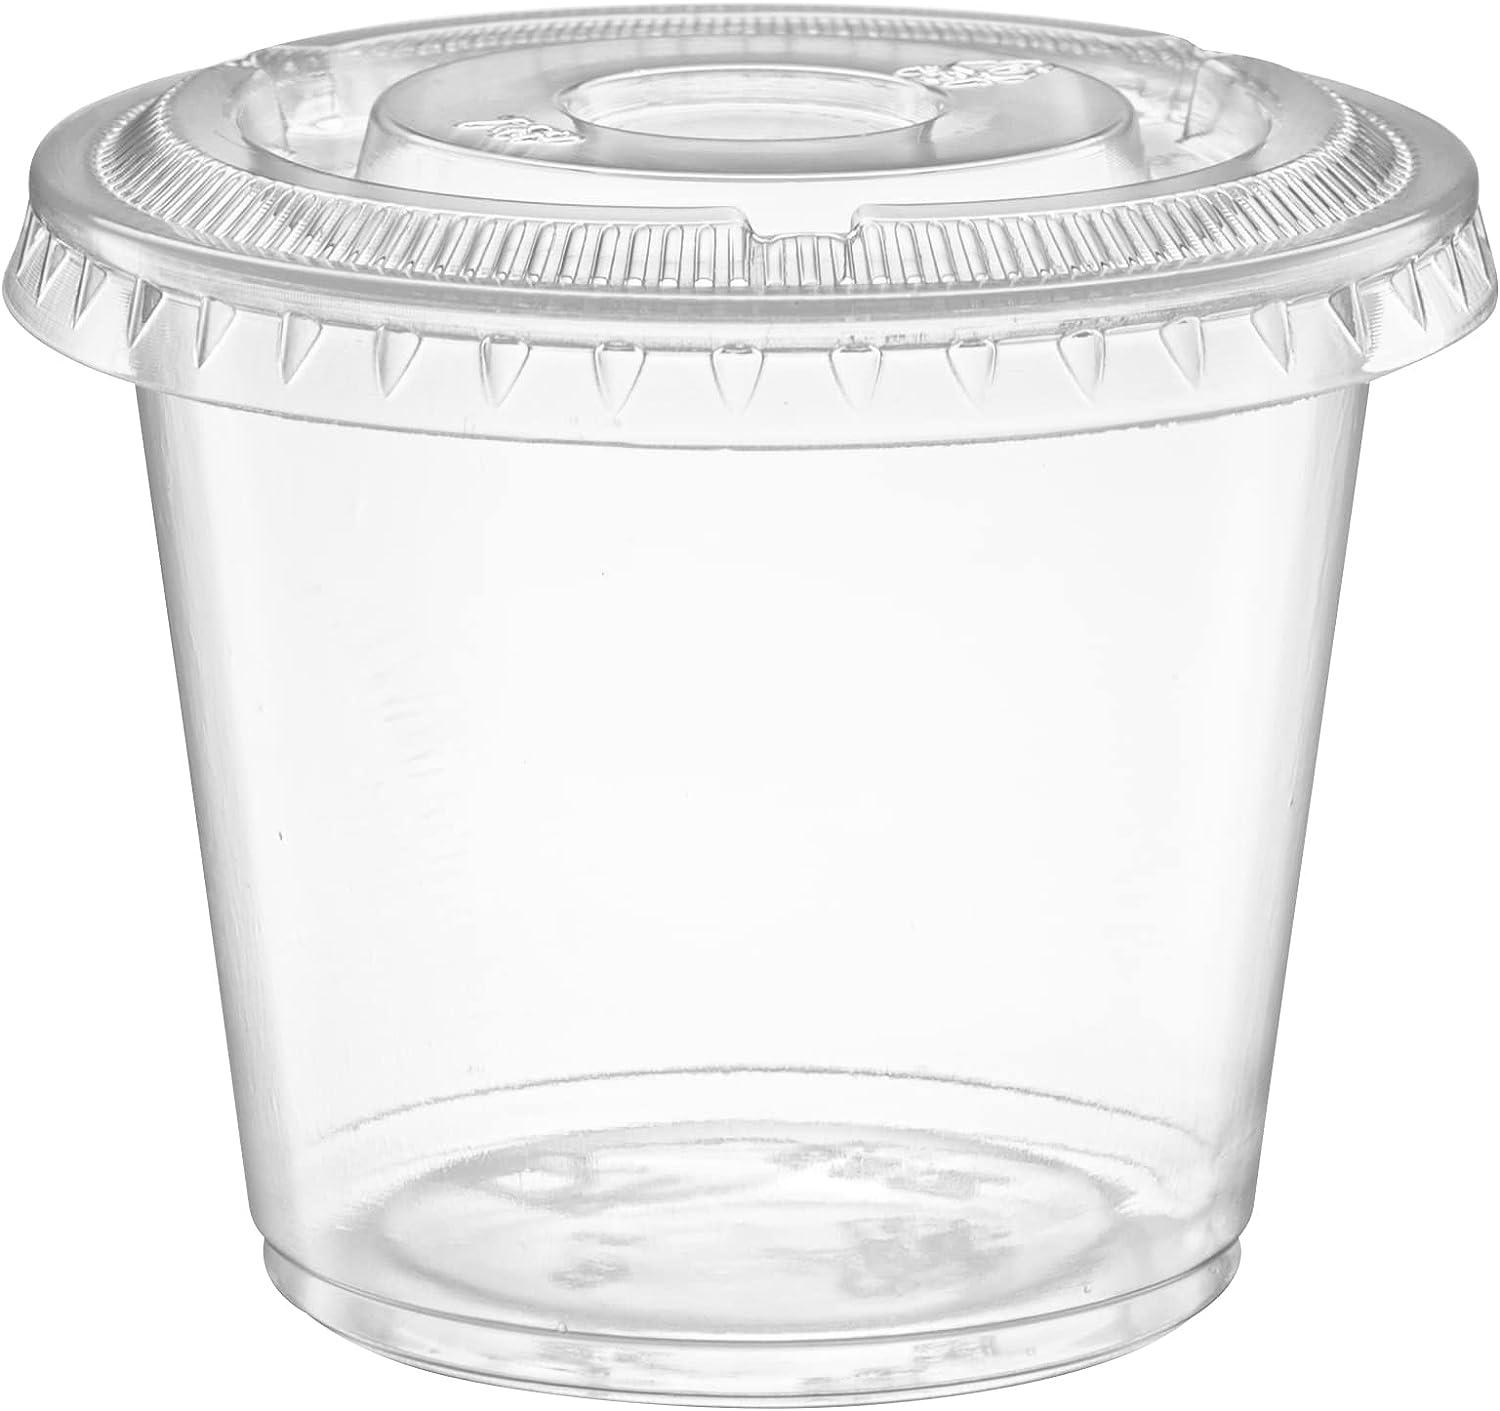 Leakproof, BPA Free 5.5 oz Souffle Cups and Lids 200 PK. Stackable Portion  Containers for Sampling, Salad Dressing, Sauces, Jello Shots. Plastic Food  Prep Supplies for Restaurant, Cafe, Catering, Deli 200 Cup